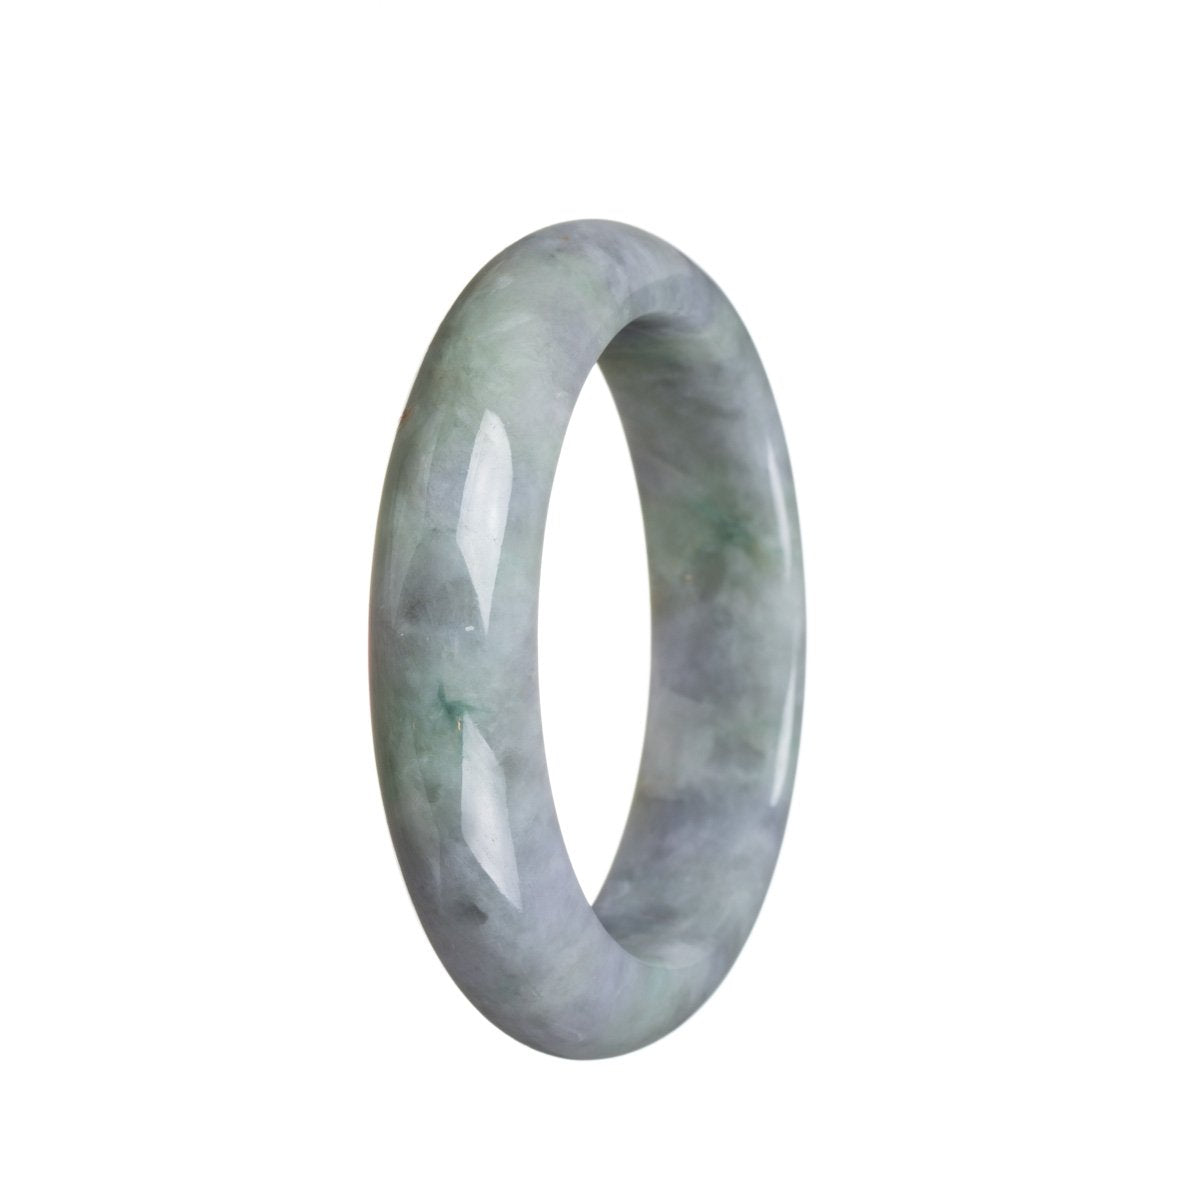 A lavender-colored traditional jade bangle with green accents, crafted from genuine Grade A semi-round jade measuring 52mm in size. By MAYS.